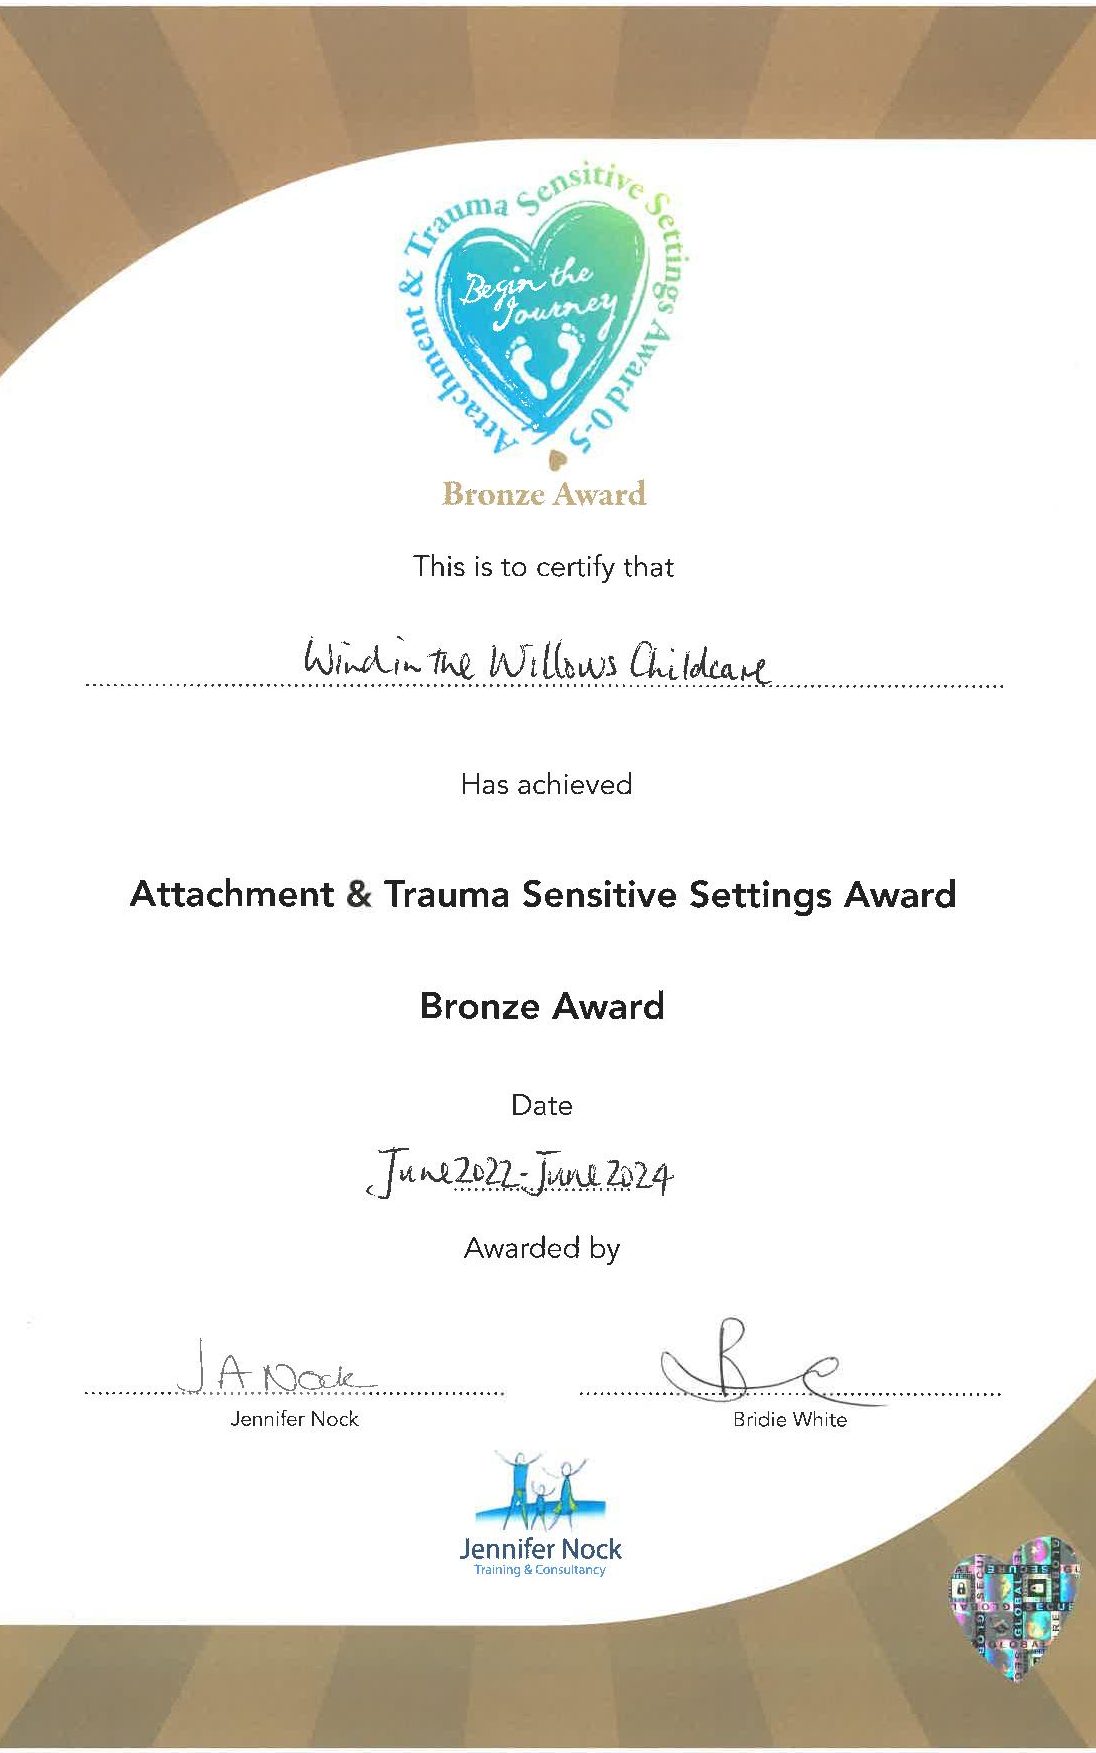 Congratulations to Tracey and her team for achieving the Attachment Trauma Sensitive setting Award